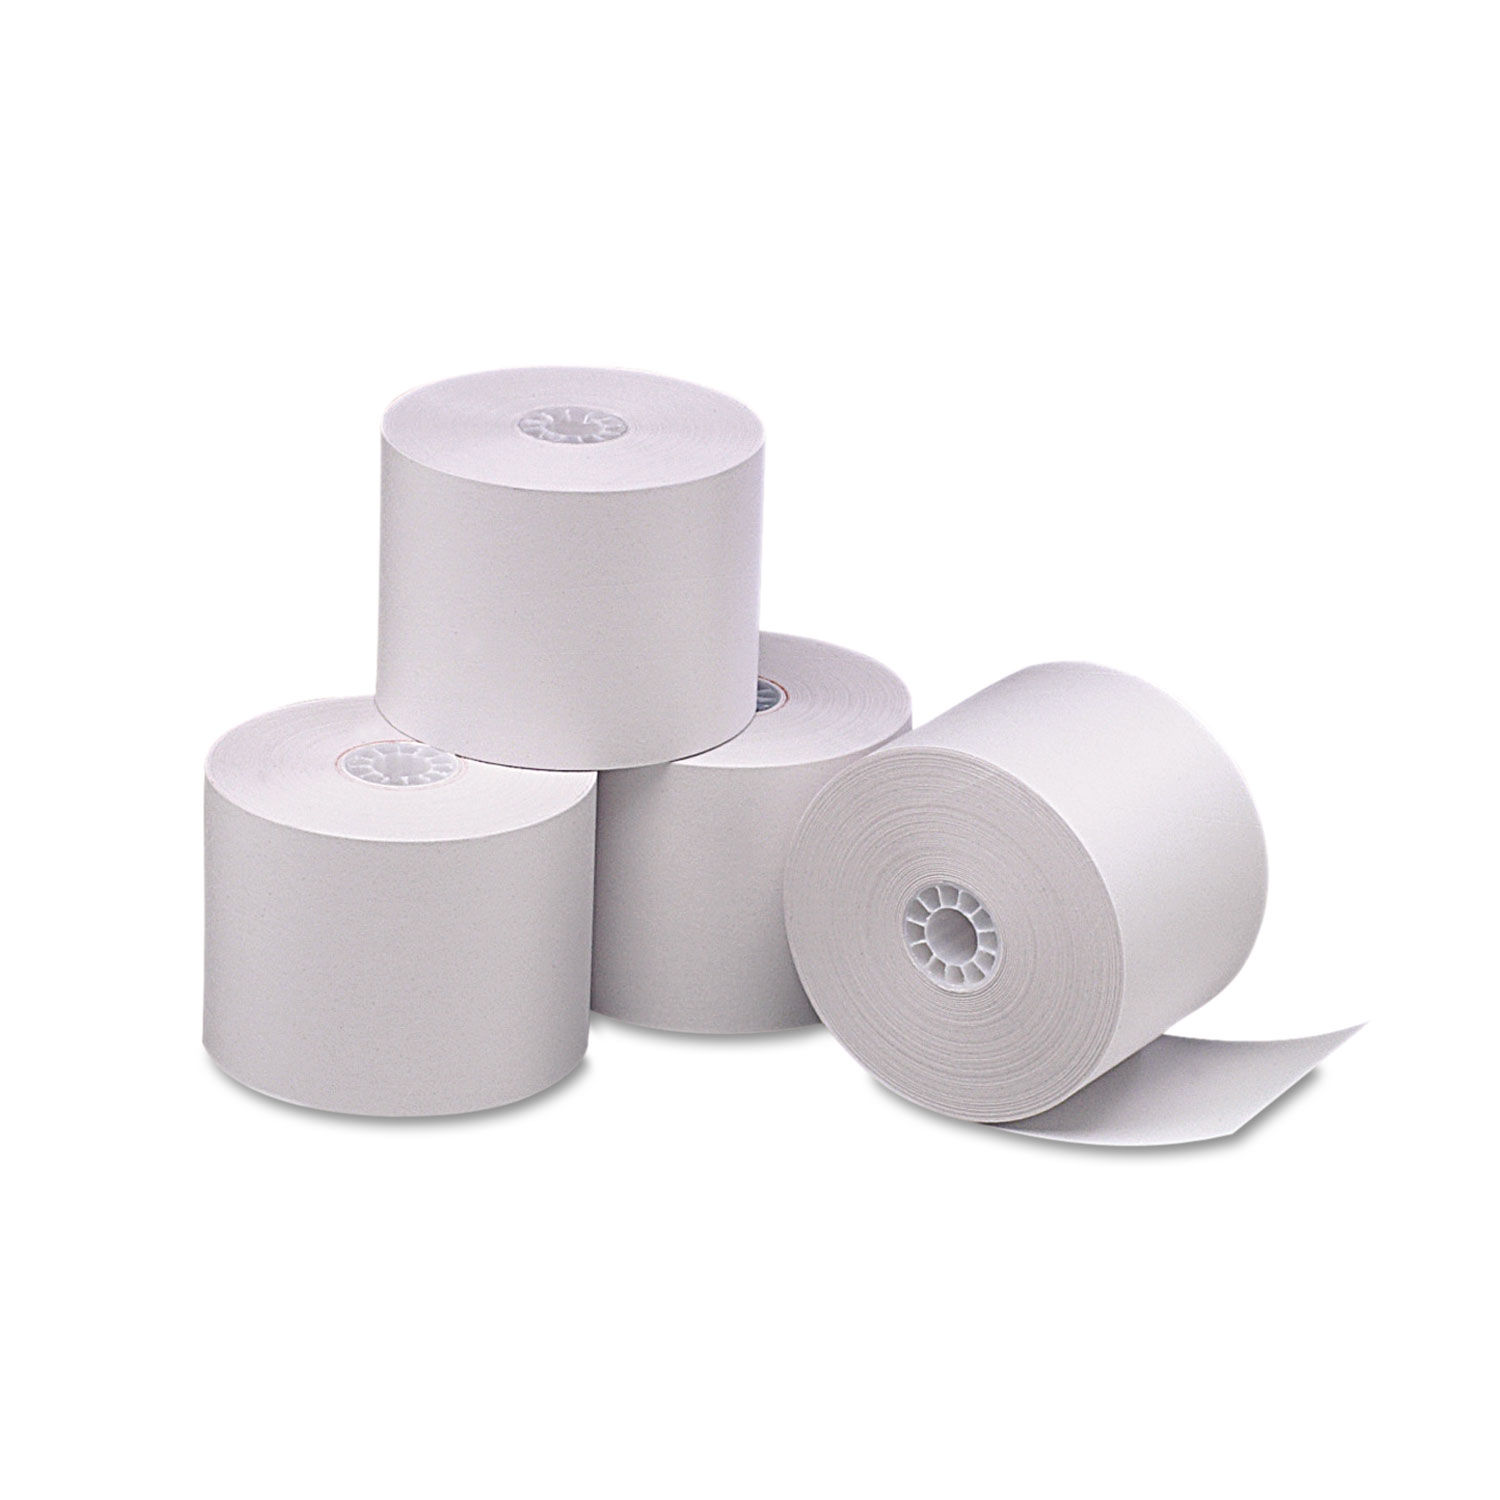 Direct Thermal Printing Thermal Paper Rolls 2.25" x 165 ft, White, 6/Pack